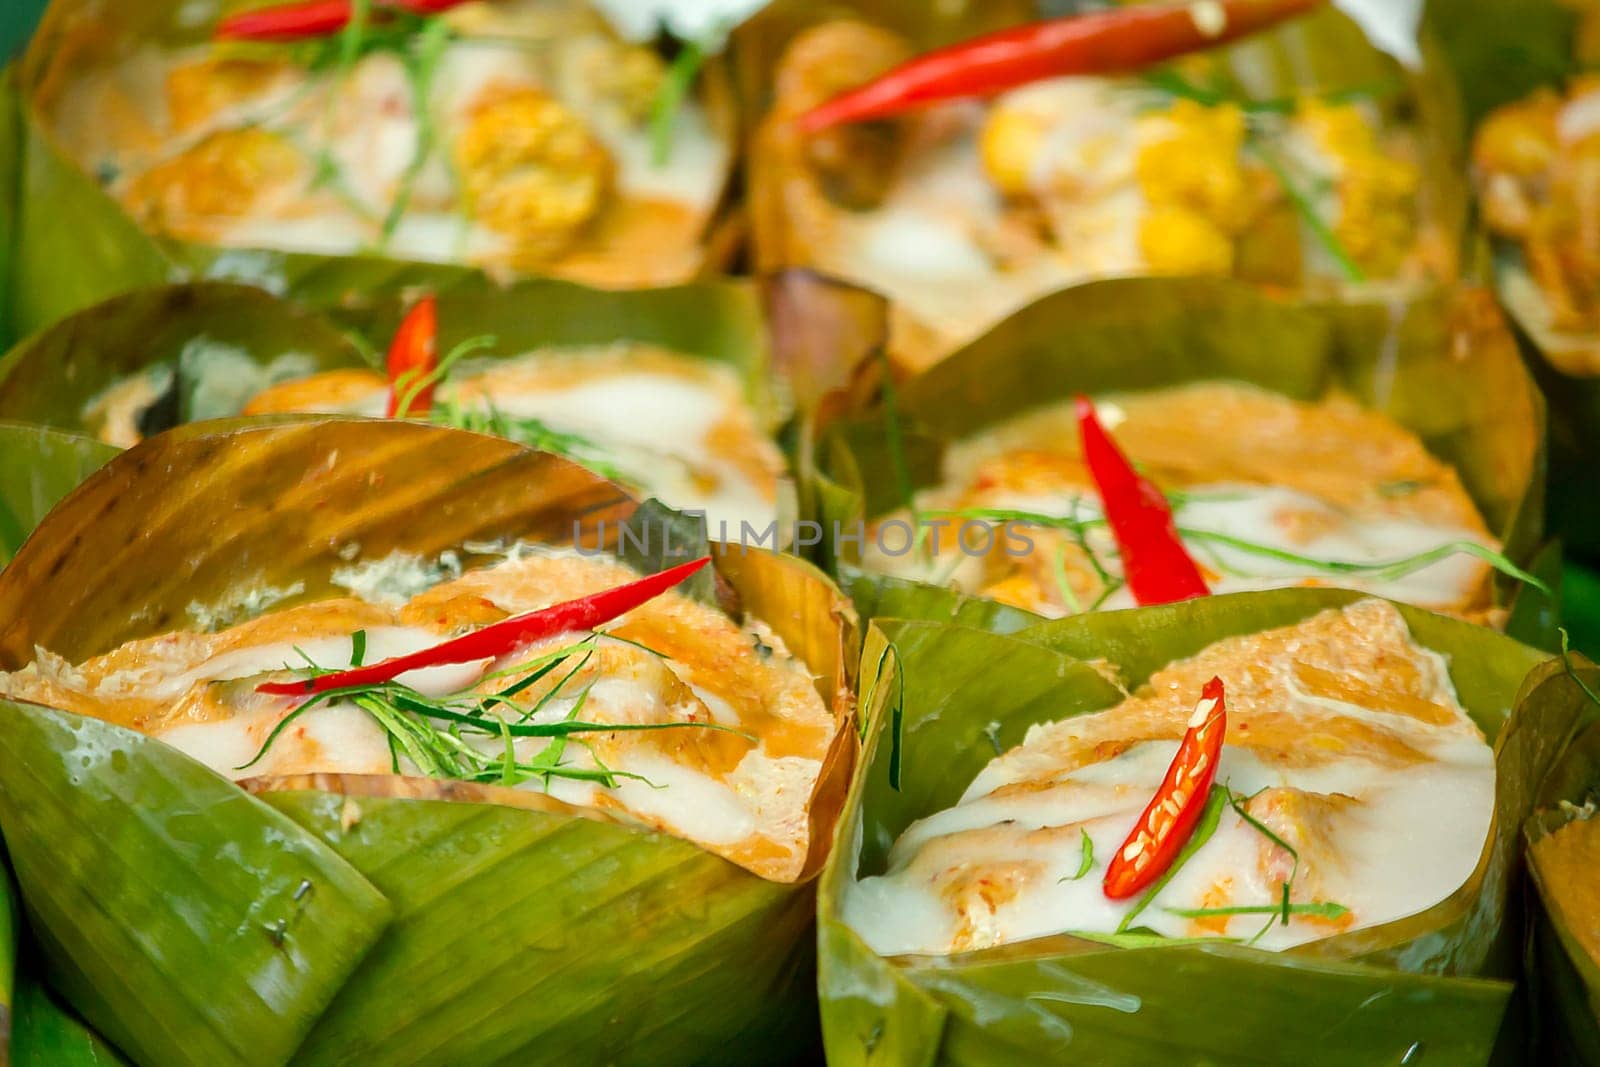 steamed fish with curry paste is another popular Thai dish